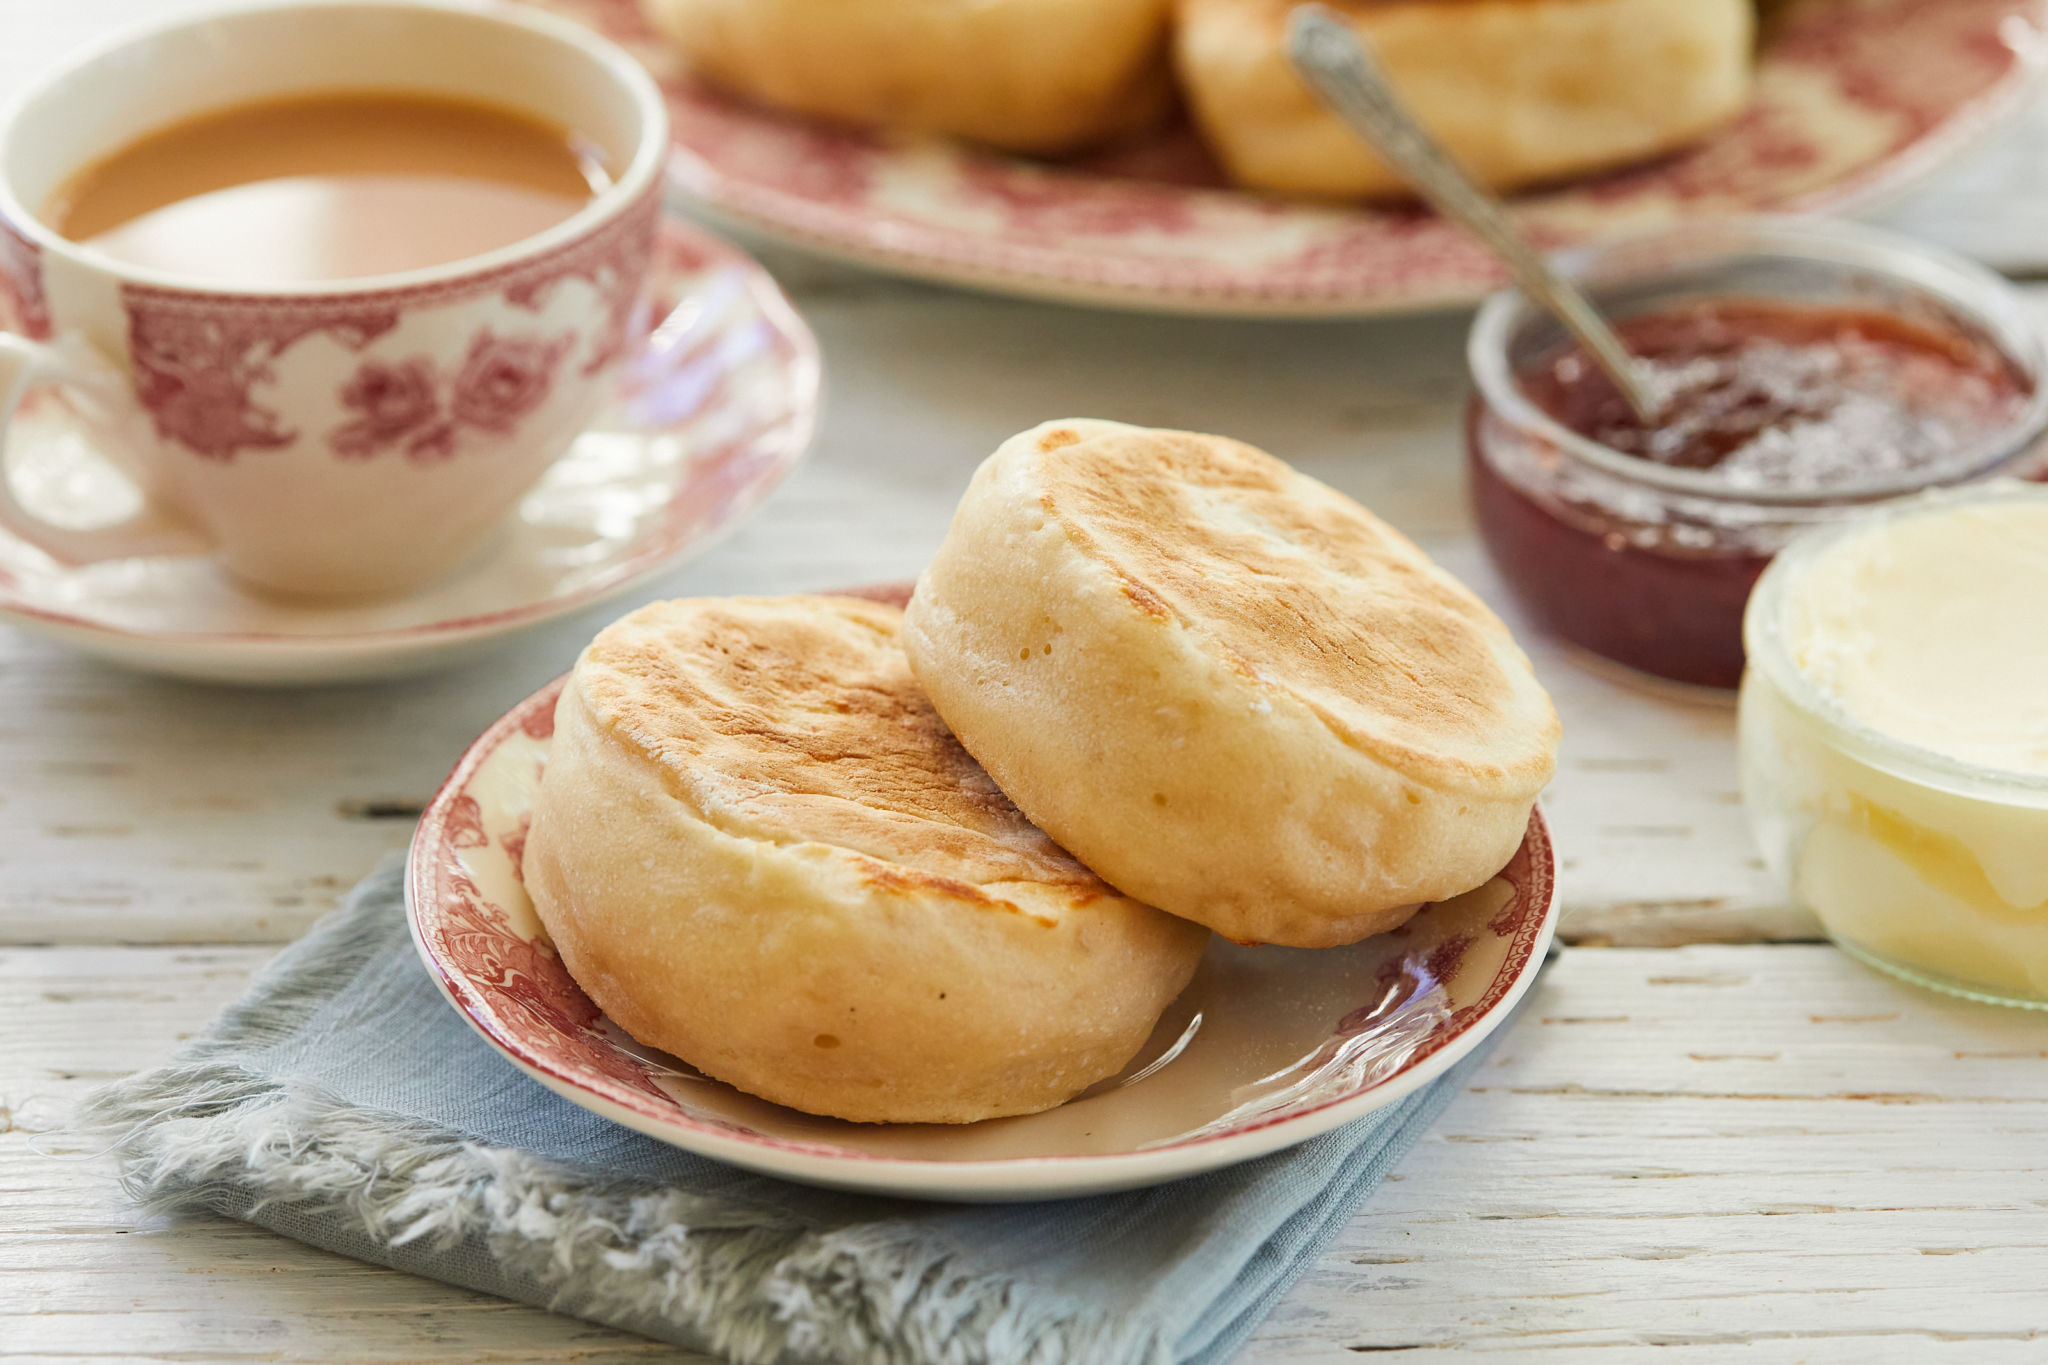 Two sourdough English muffins on a dish next to a cup of tea.